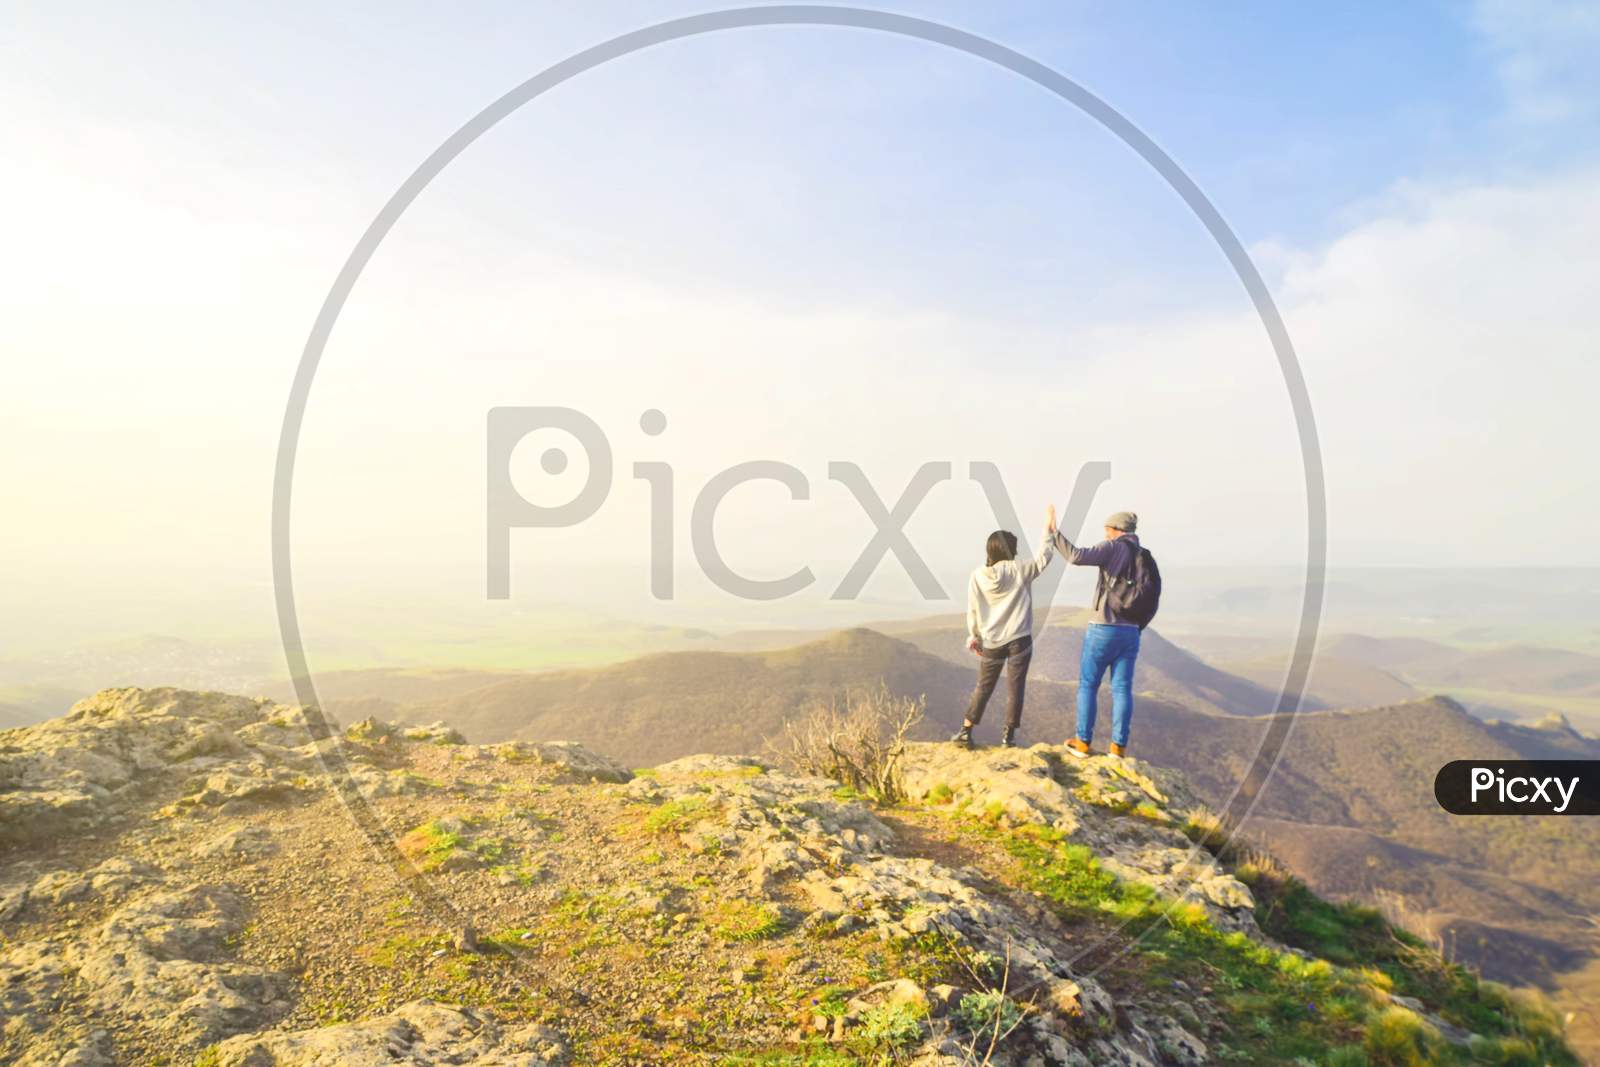 Caucasian Couple Enjoy Panorama Together With Hands Up Clapping Outdoors.Success, Freedom And Happy Travels Concept.